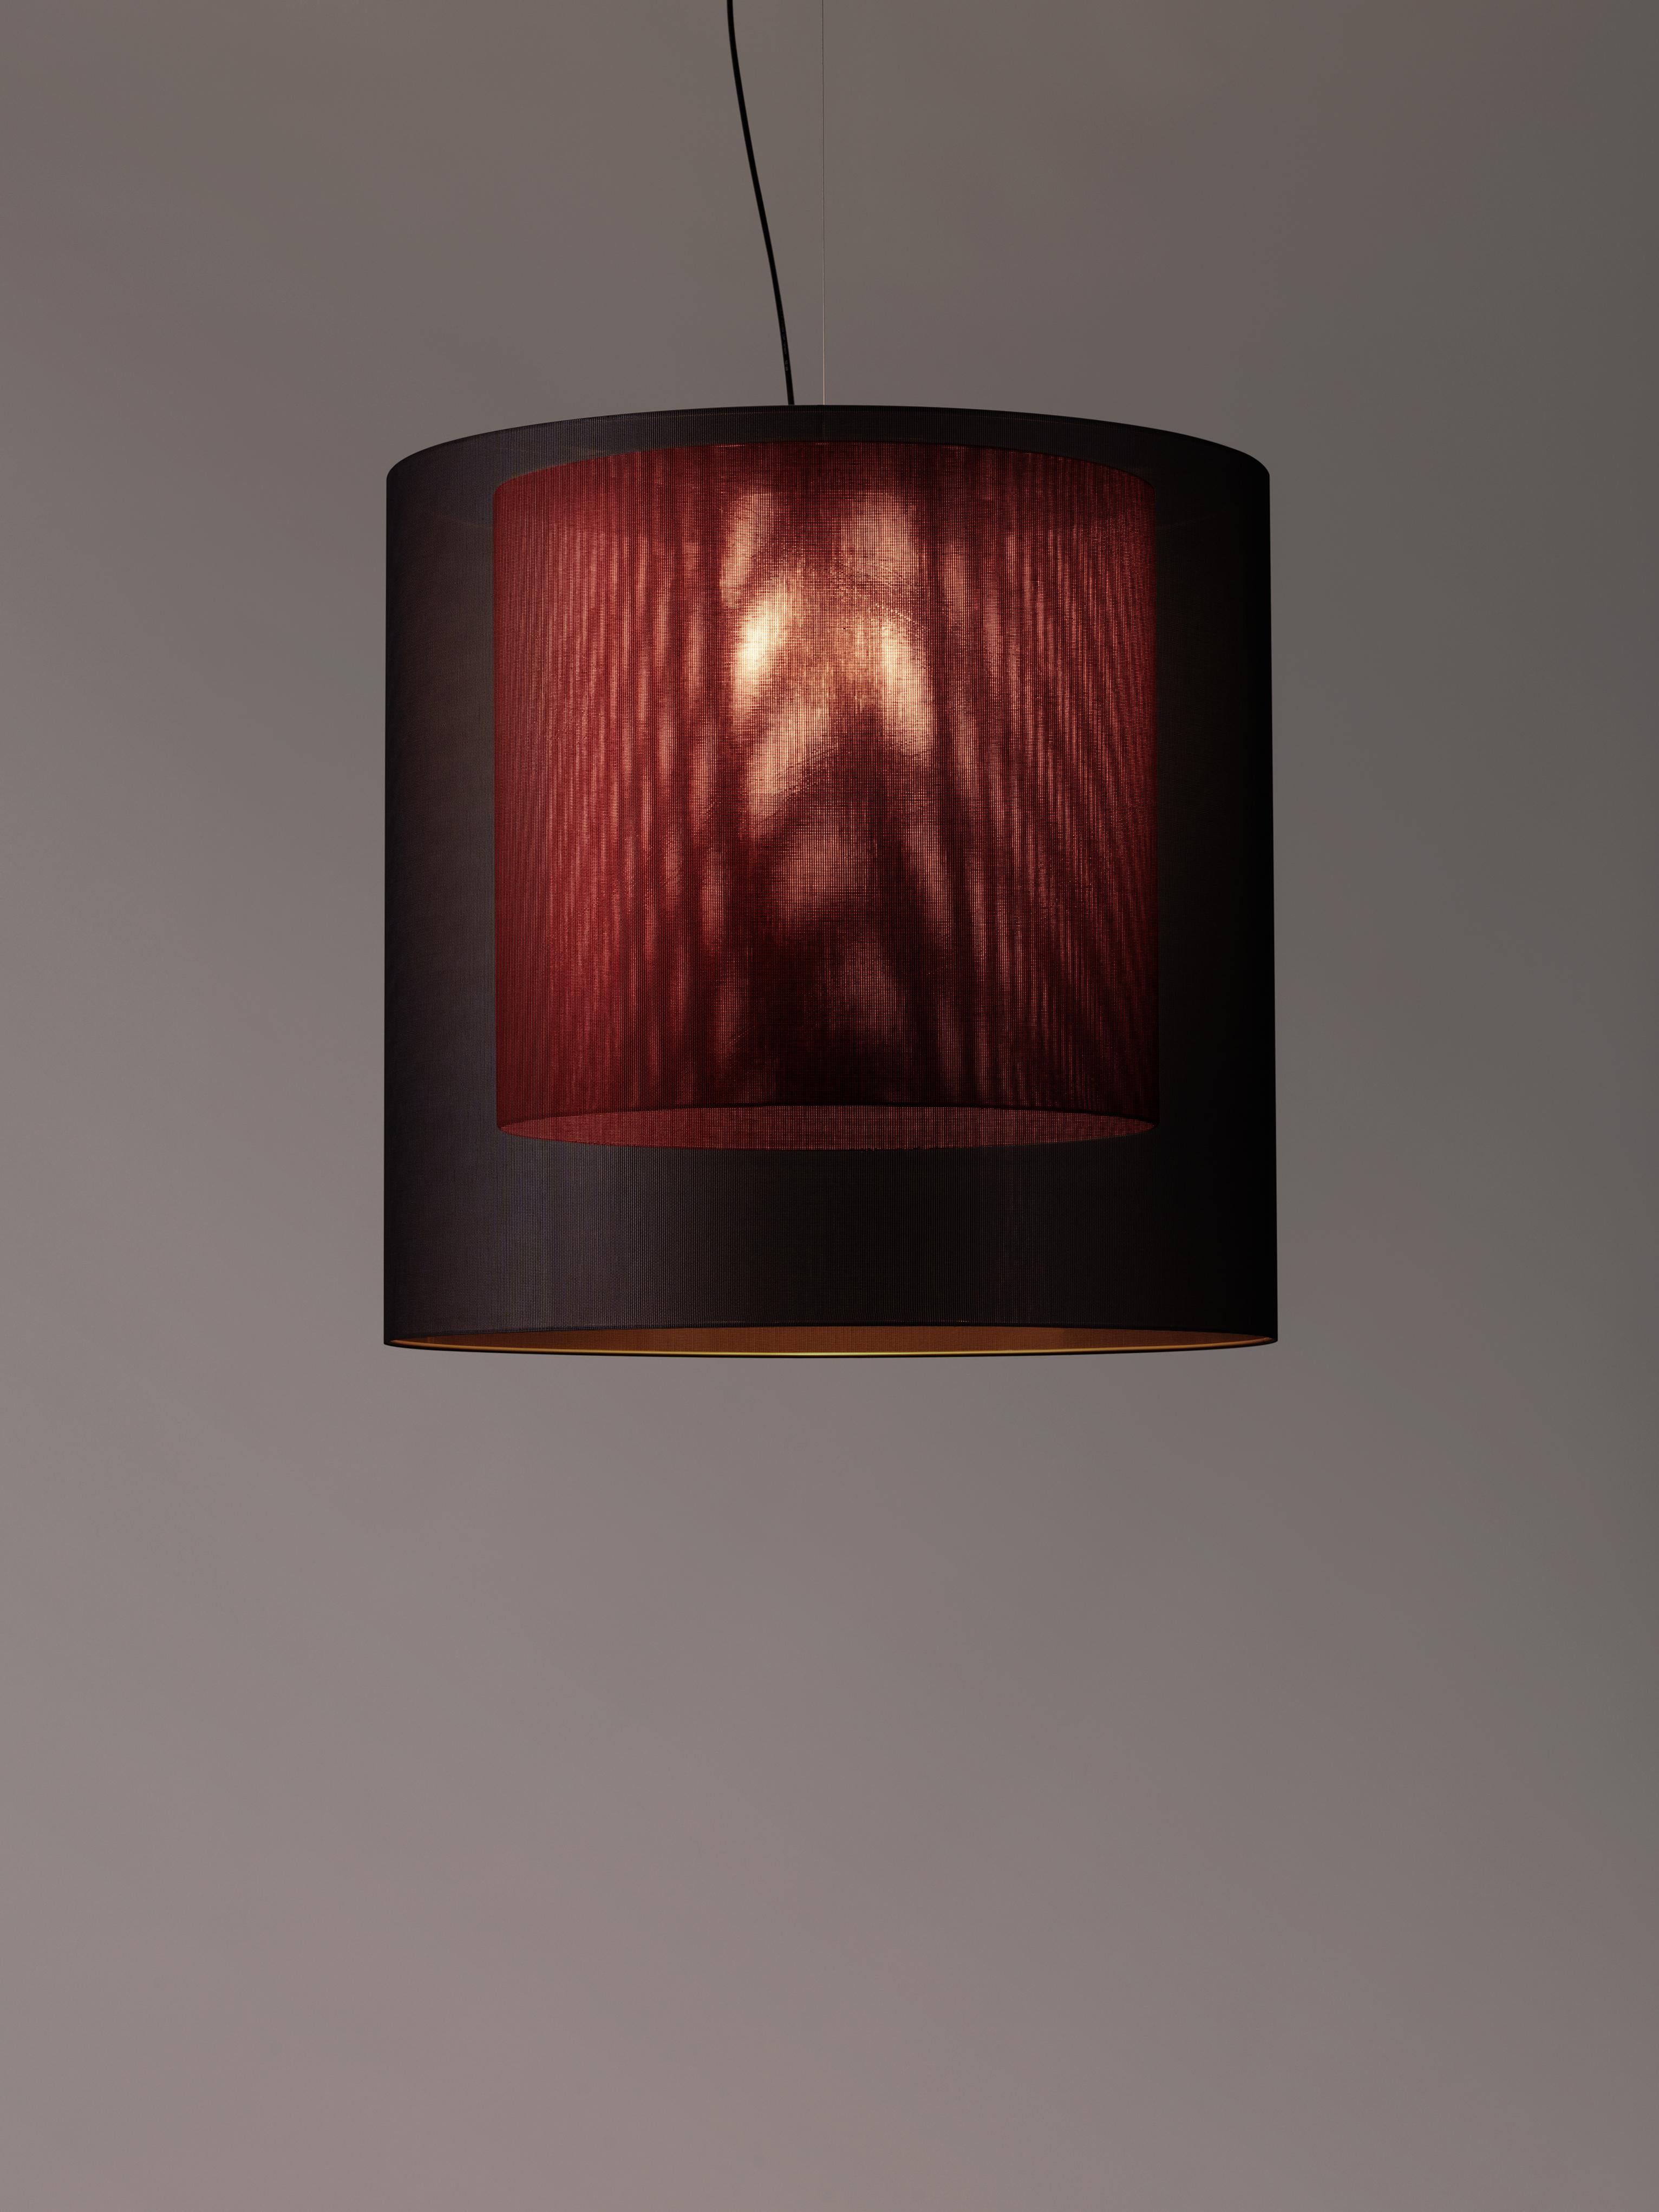 Black and red Moaré XL pendant lamp by Antoni Arola
Dimensions: D 83 x H 81 cm
Materials: Metal, polyester.
Available in other colors and sizes.

Moaré’s multiple combinations of formats and colours make it highly versatile. The series takes